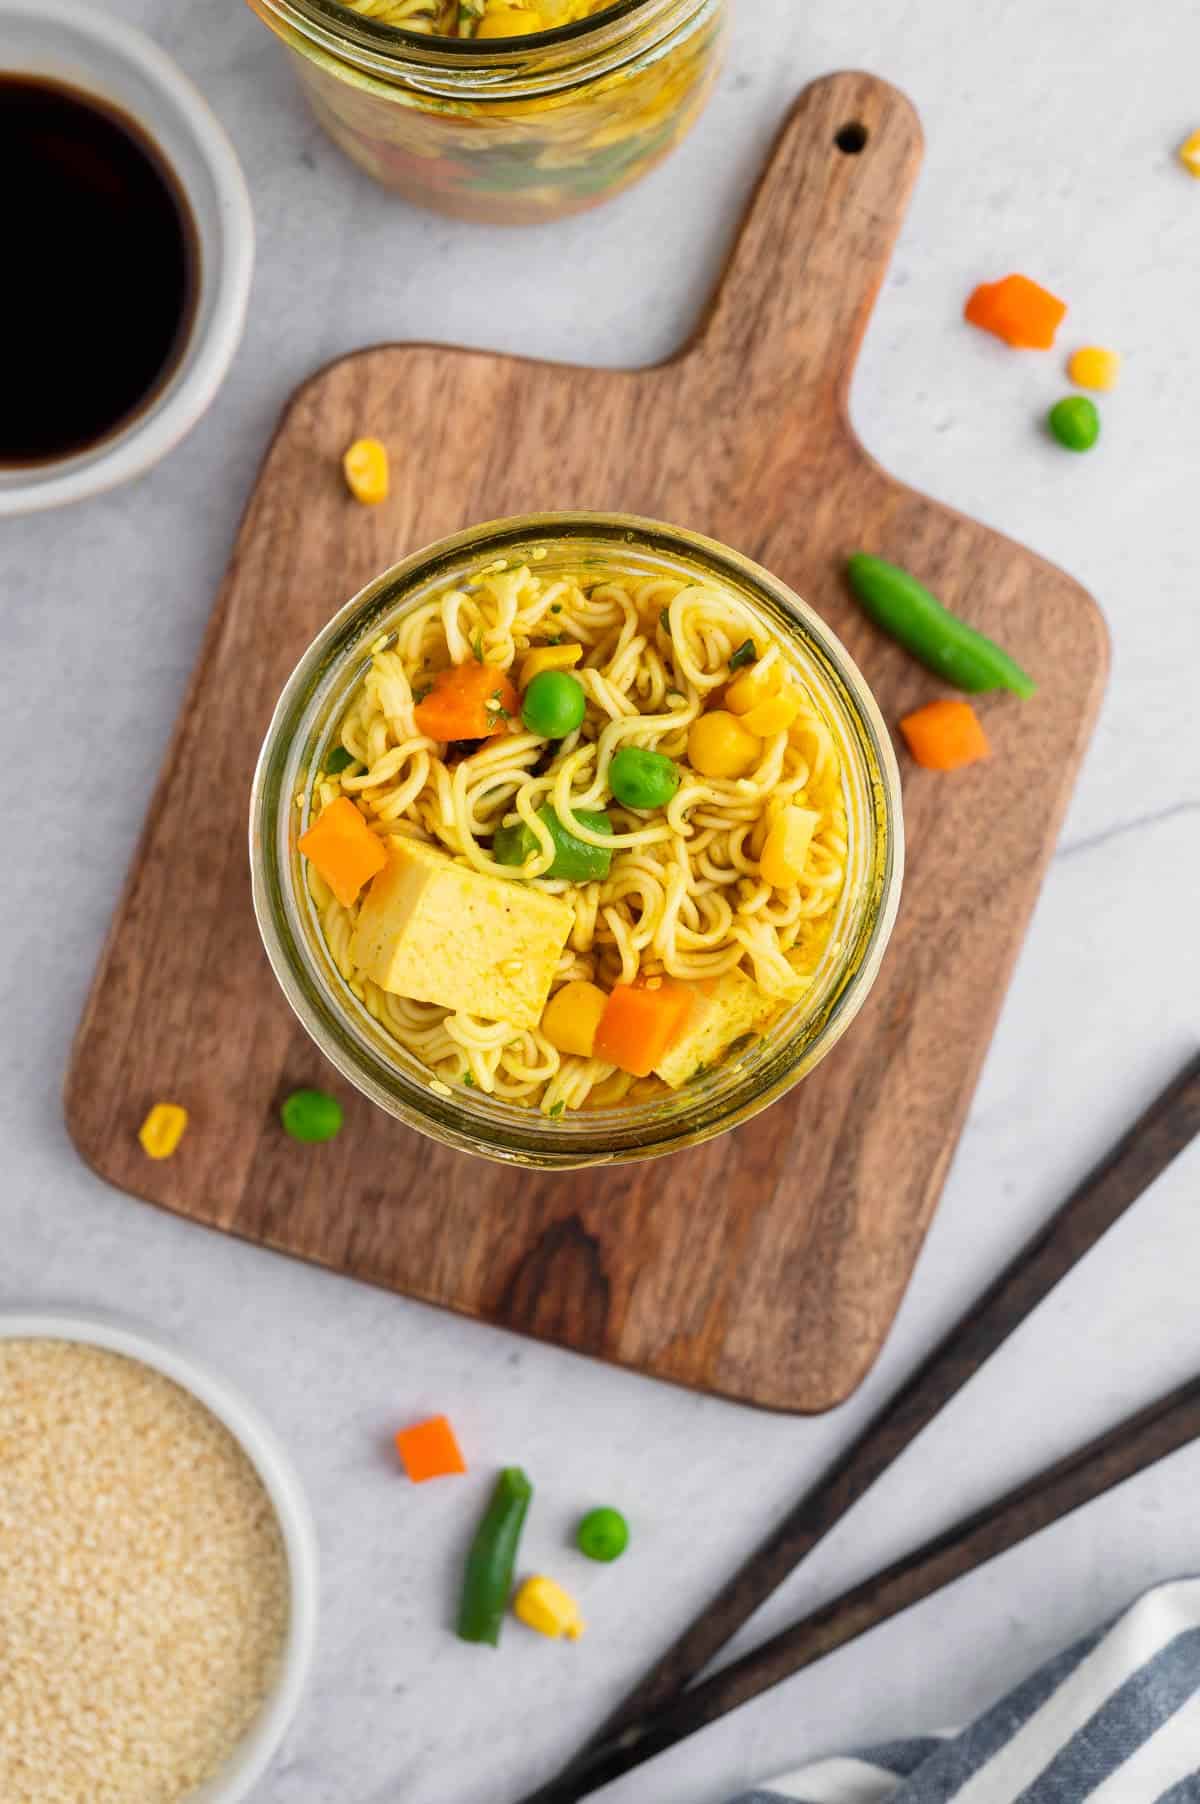 Vegan instant ramen noodles in a glass jar with tofu, carrots and peas.